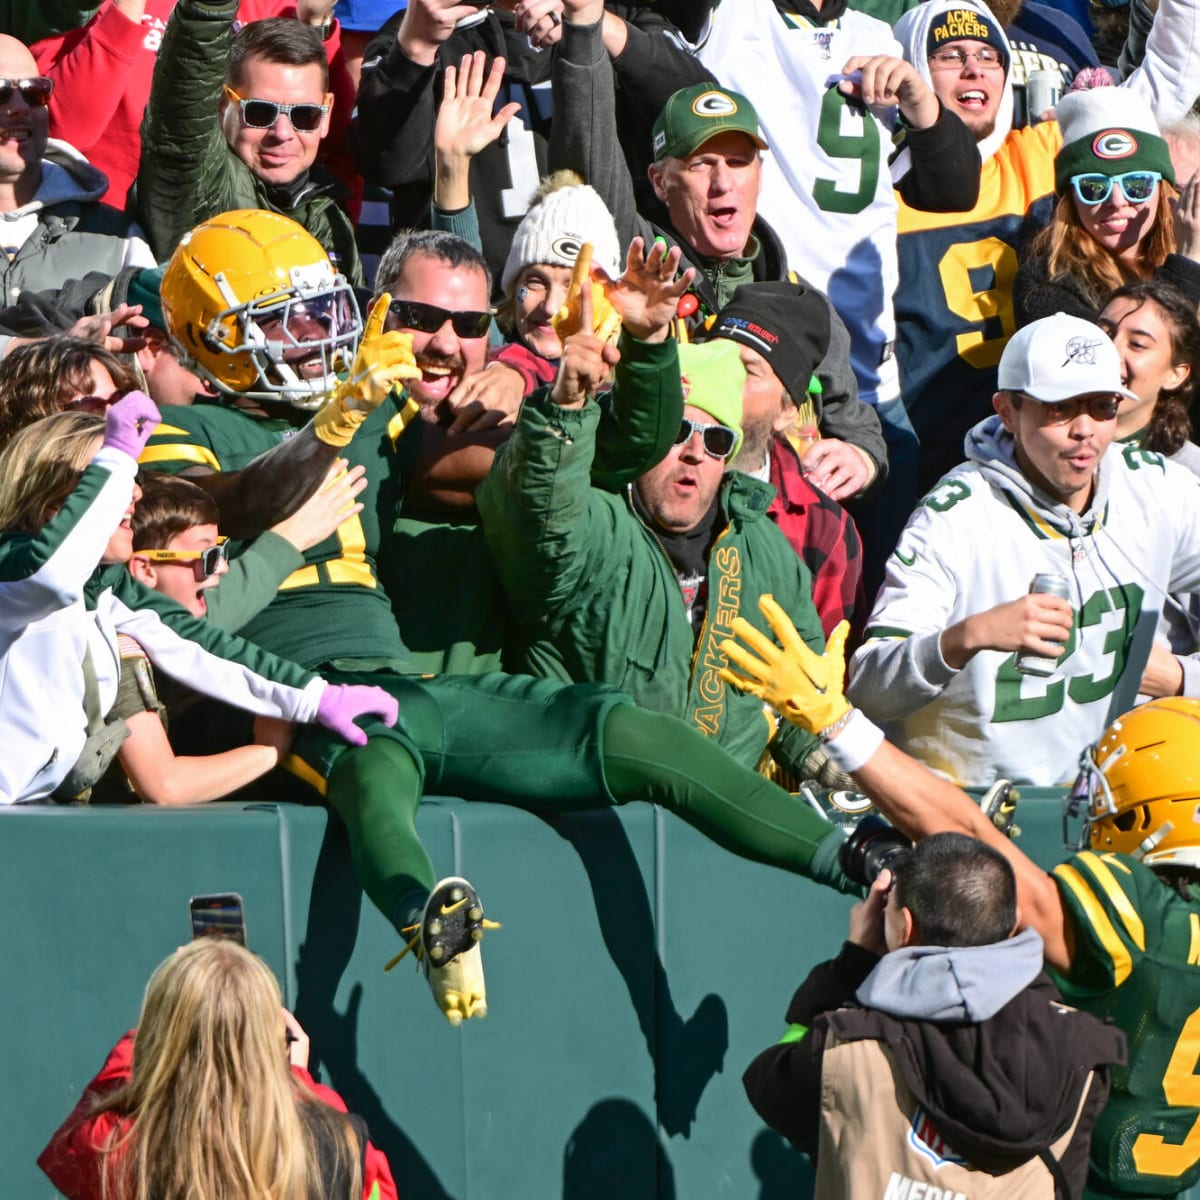 The Green Bay Packers: where fans rather than a billionaire are